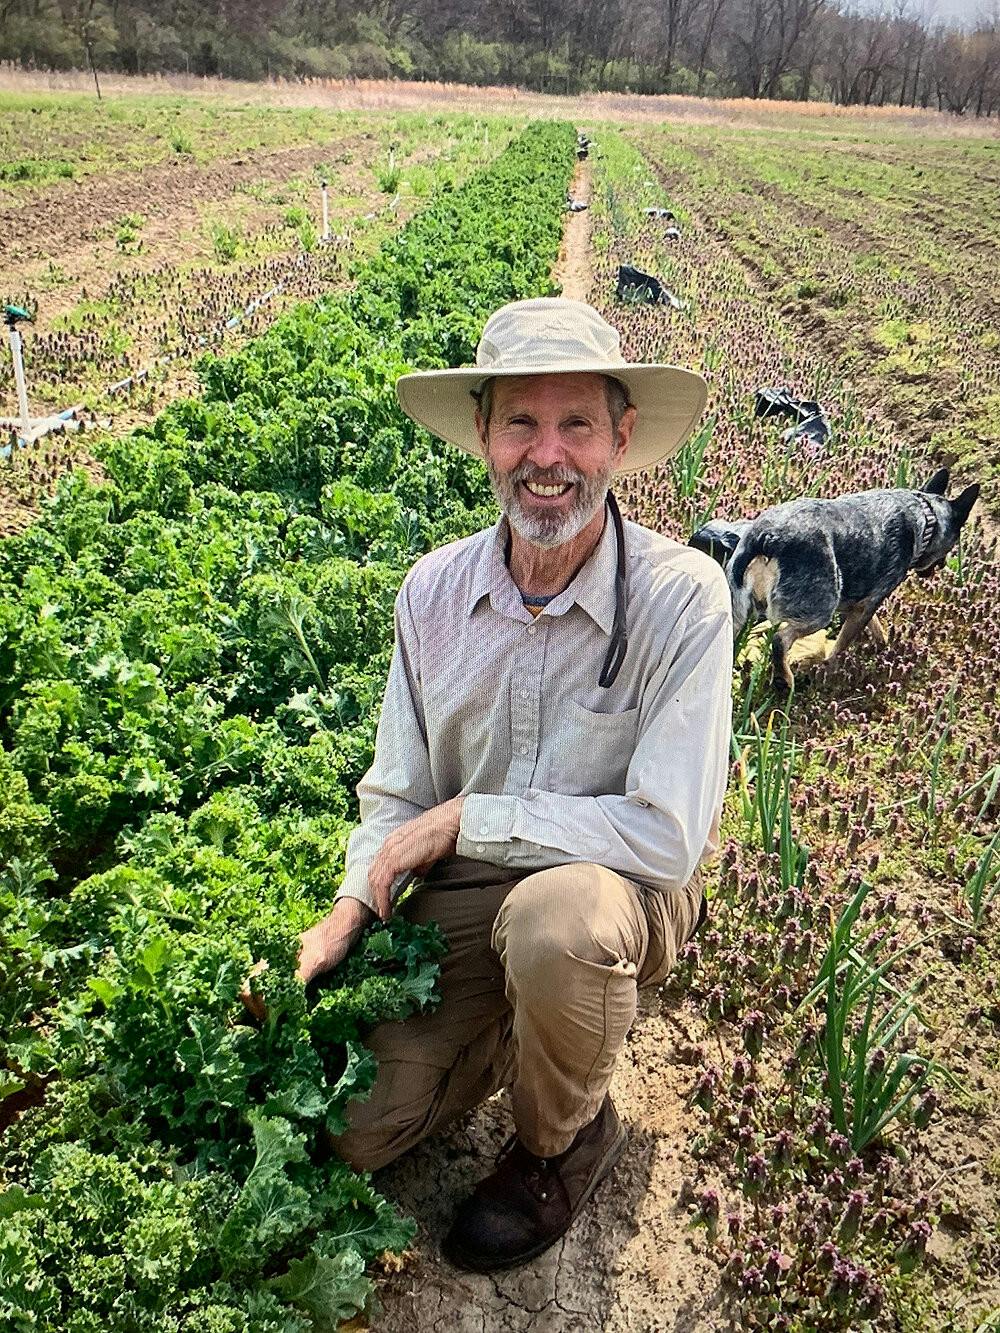 <p>Griffin pictured working on the farm, where worked since 2016 before the cotract termination. Photo provided by Fiona Lawler<br/><br/></p>